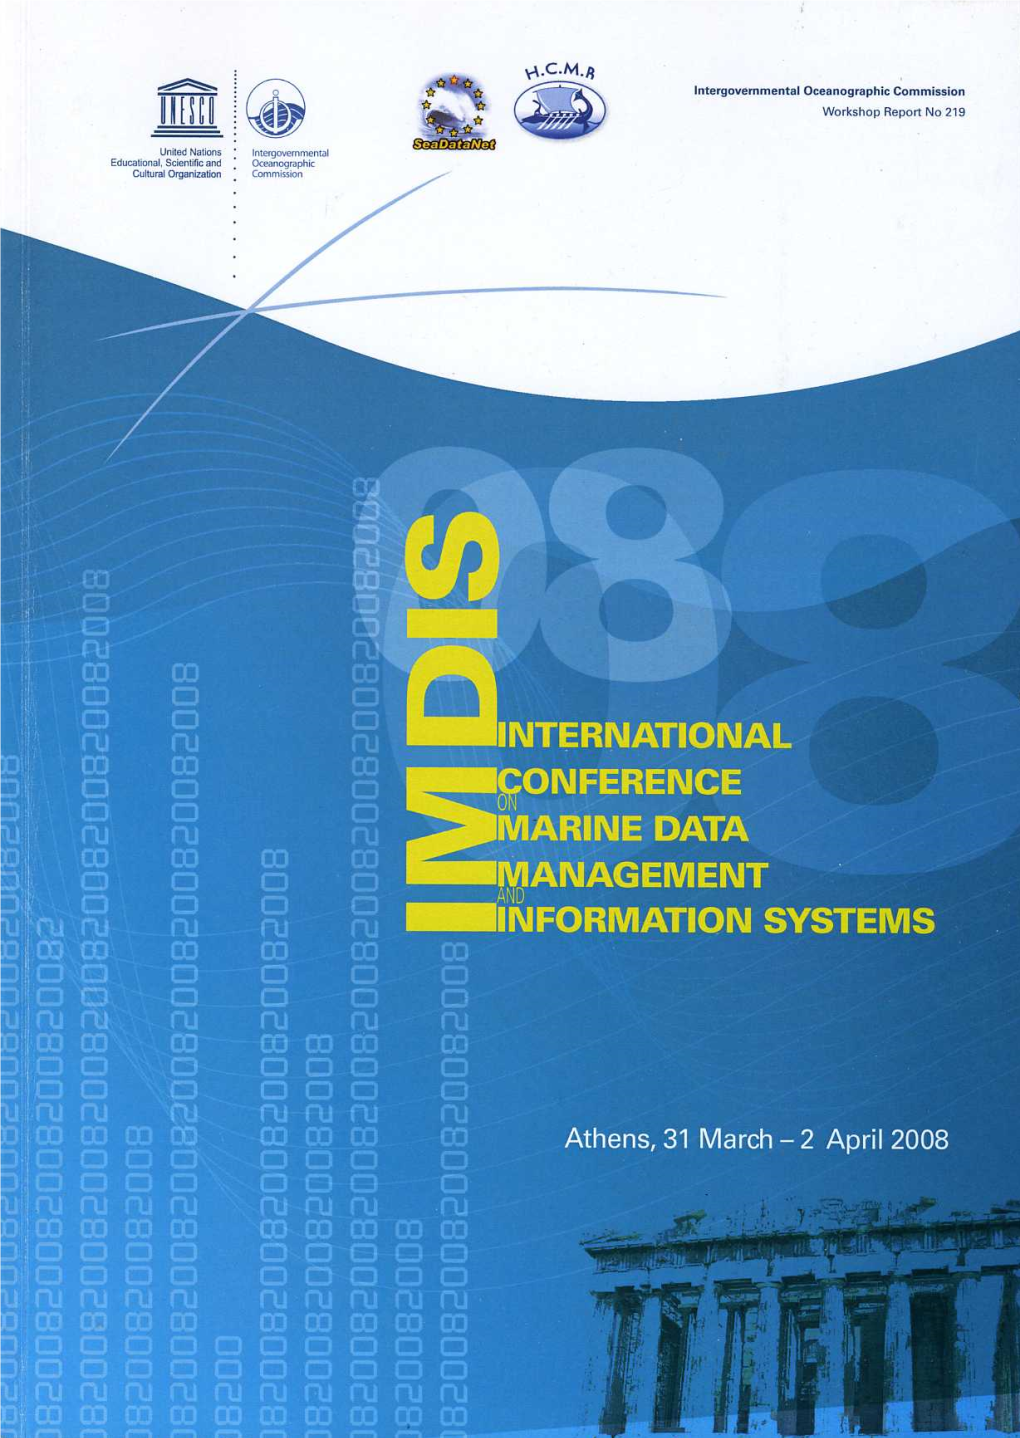 Data Management and Information Systems